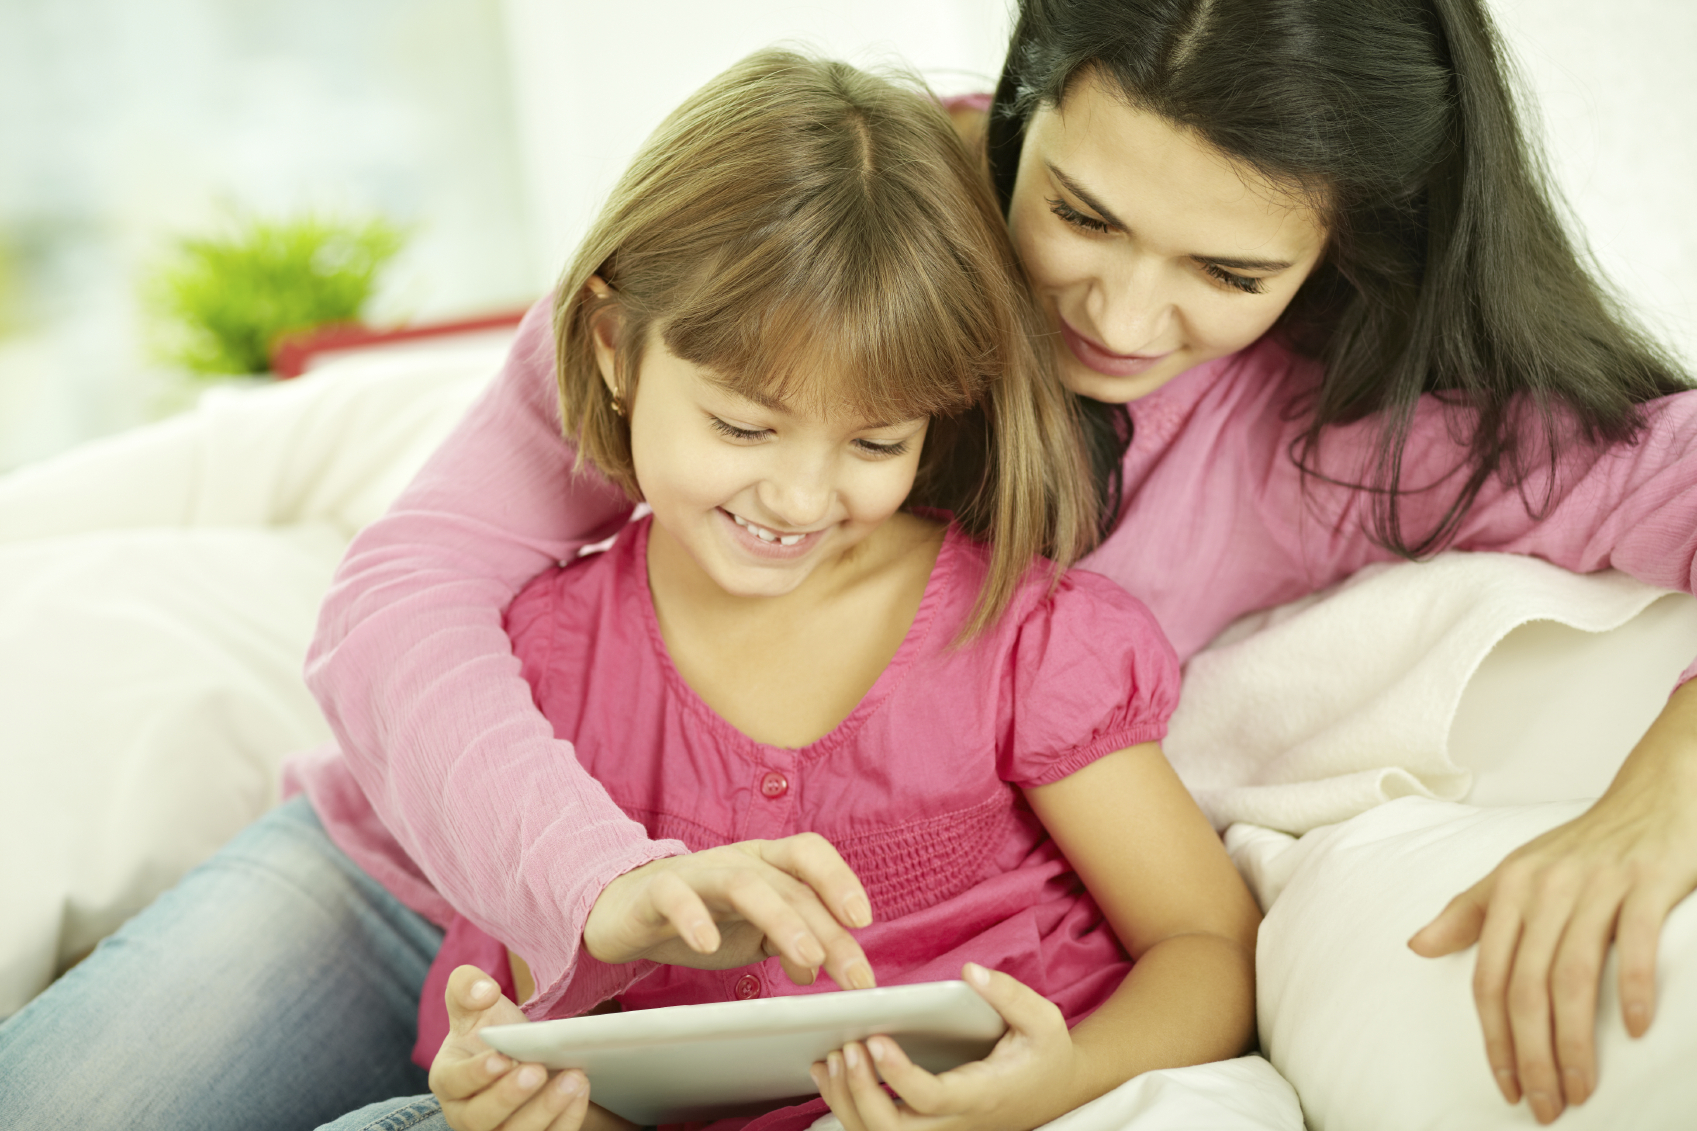 Marketing To Women: What’s Mom Really Doing Online